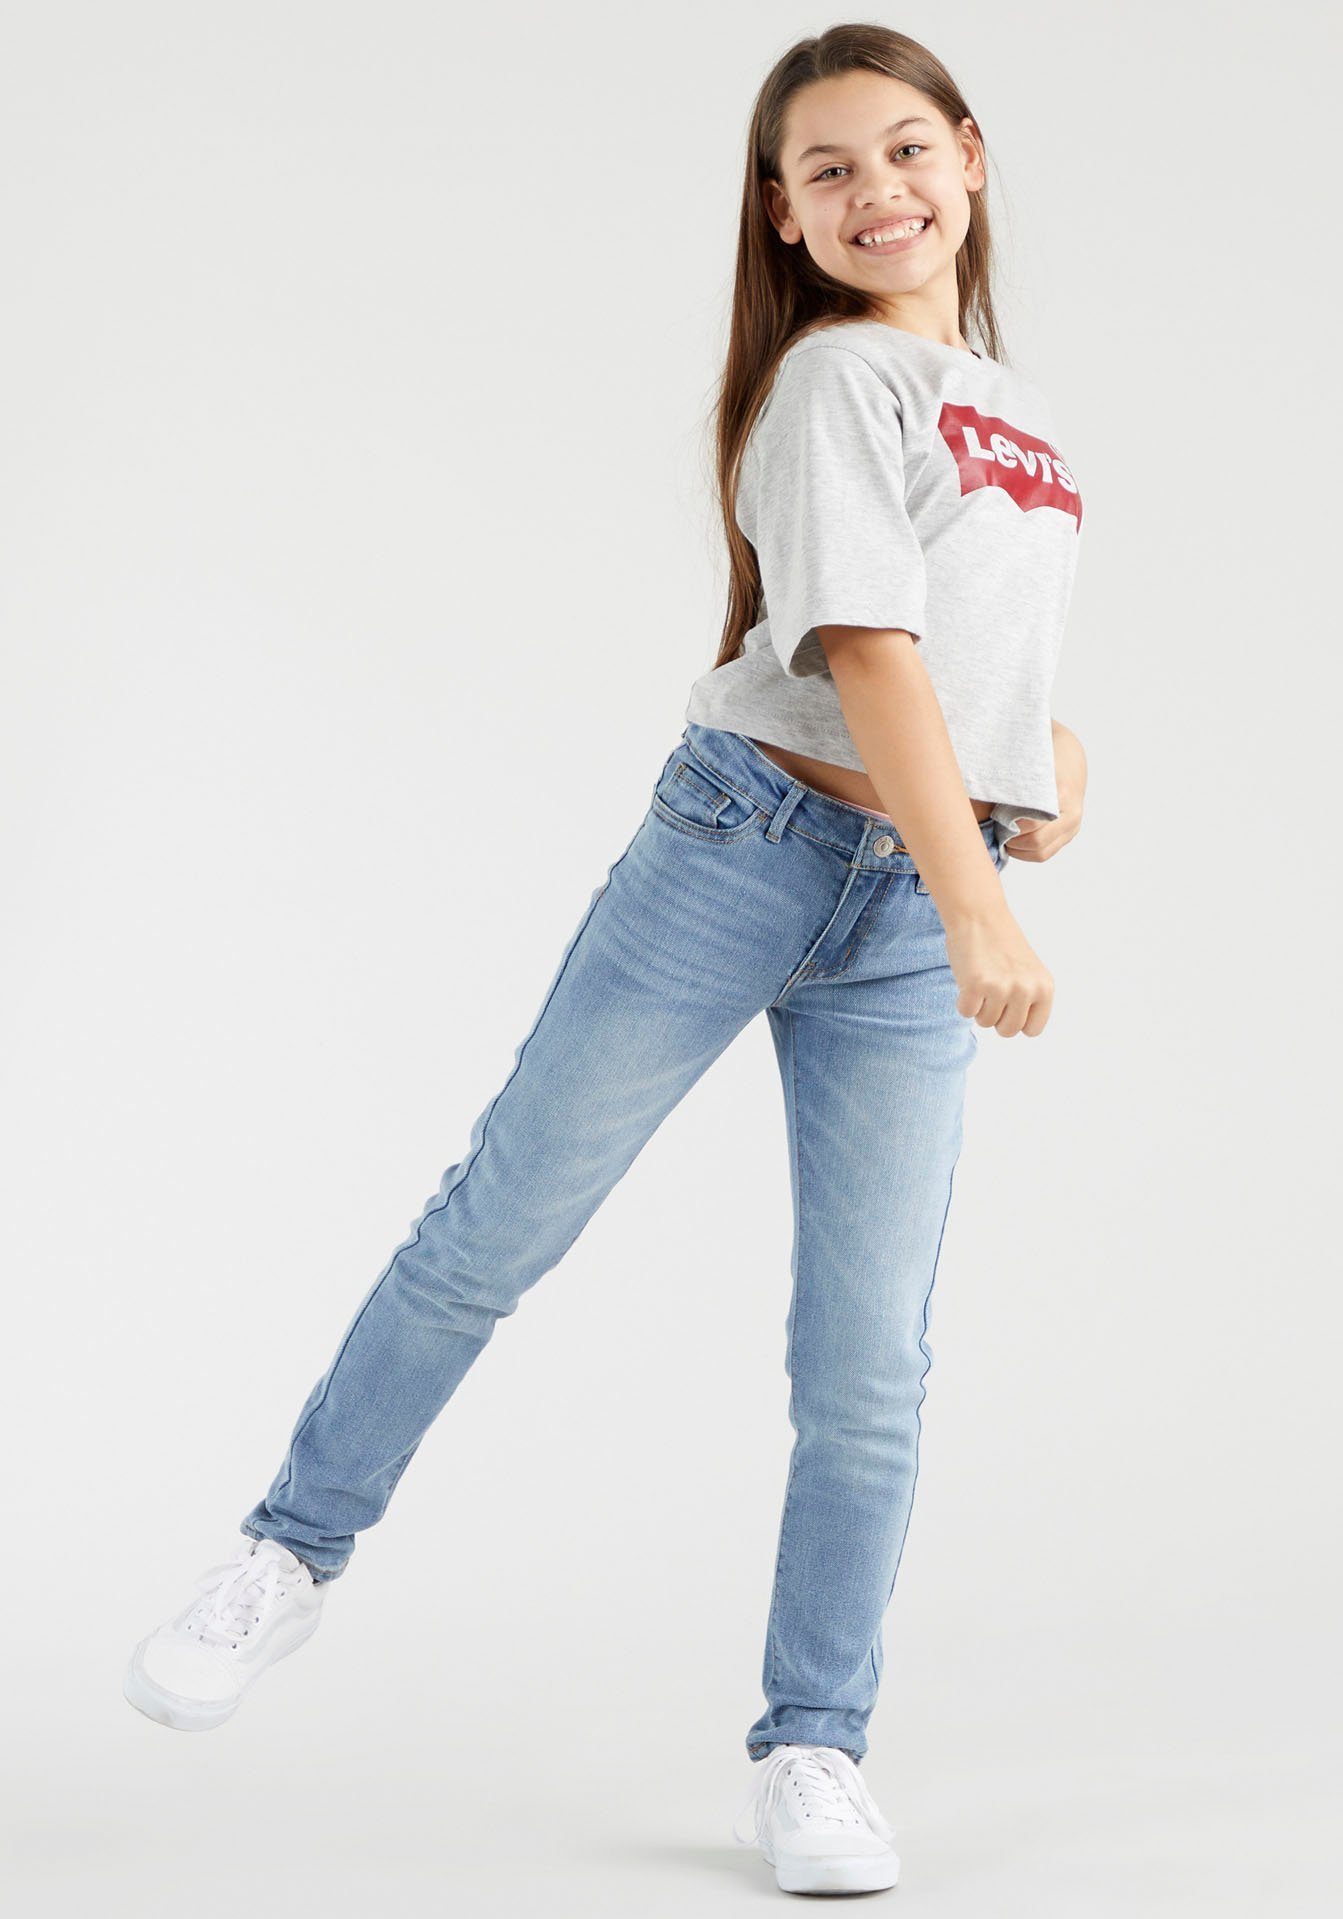 Kids GIRLS Levi's® Stretch-Jeans SKINNY used FIT for JEANS SUPER 710™ bleached